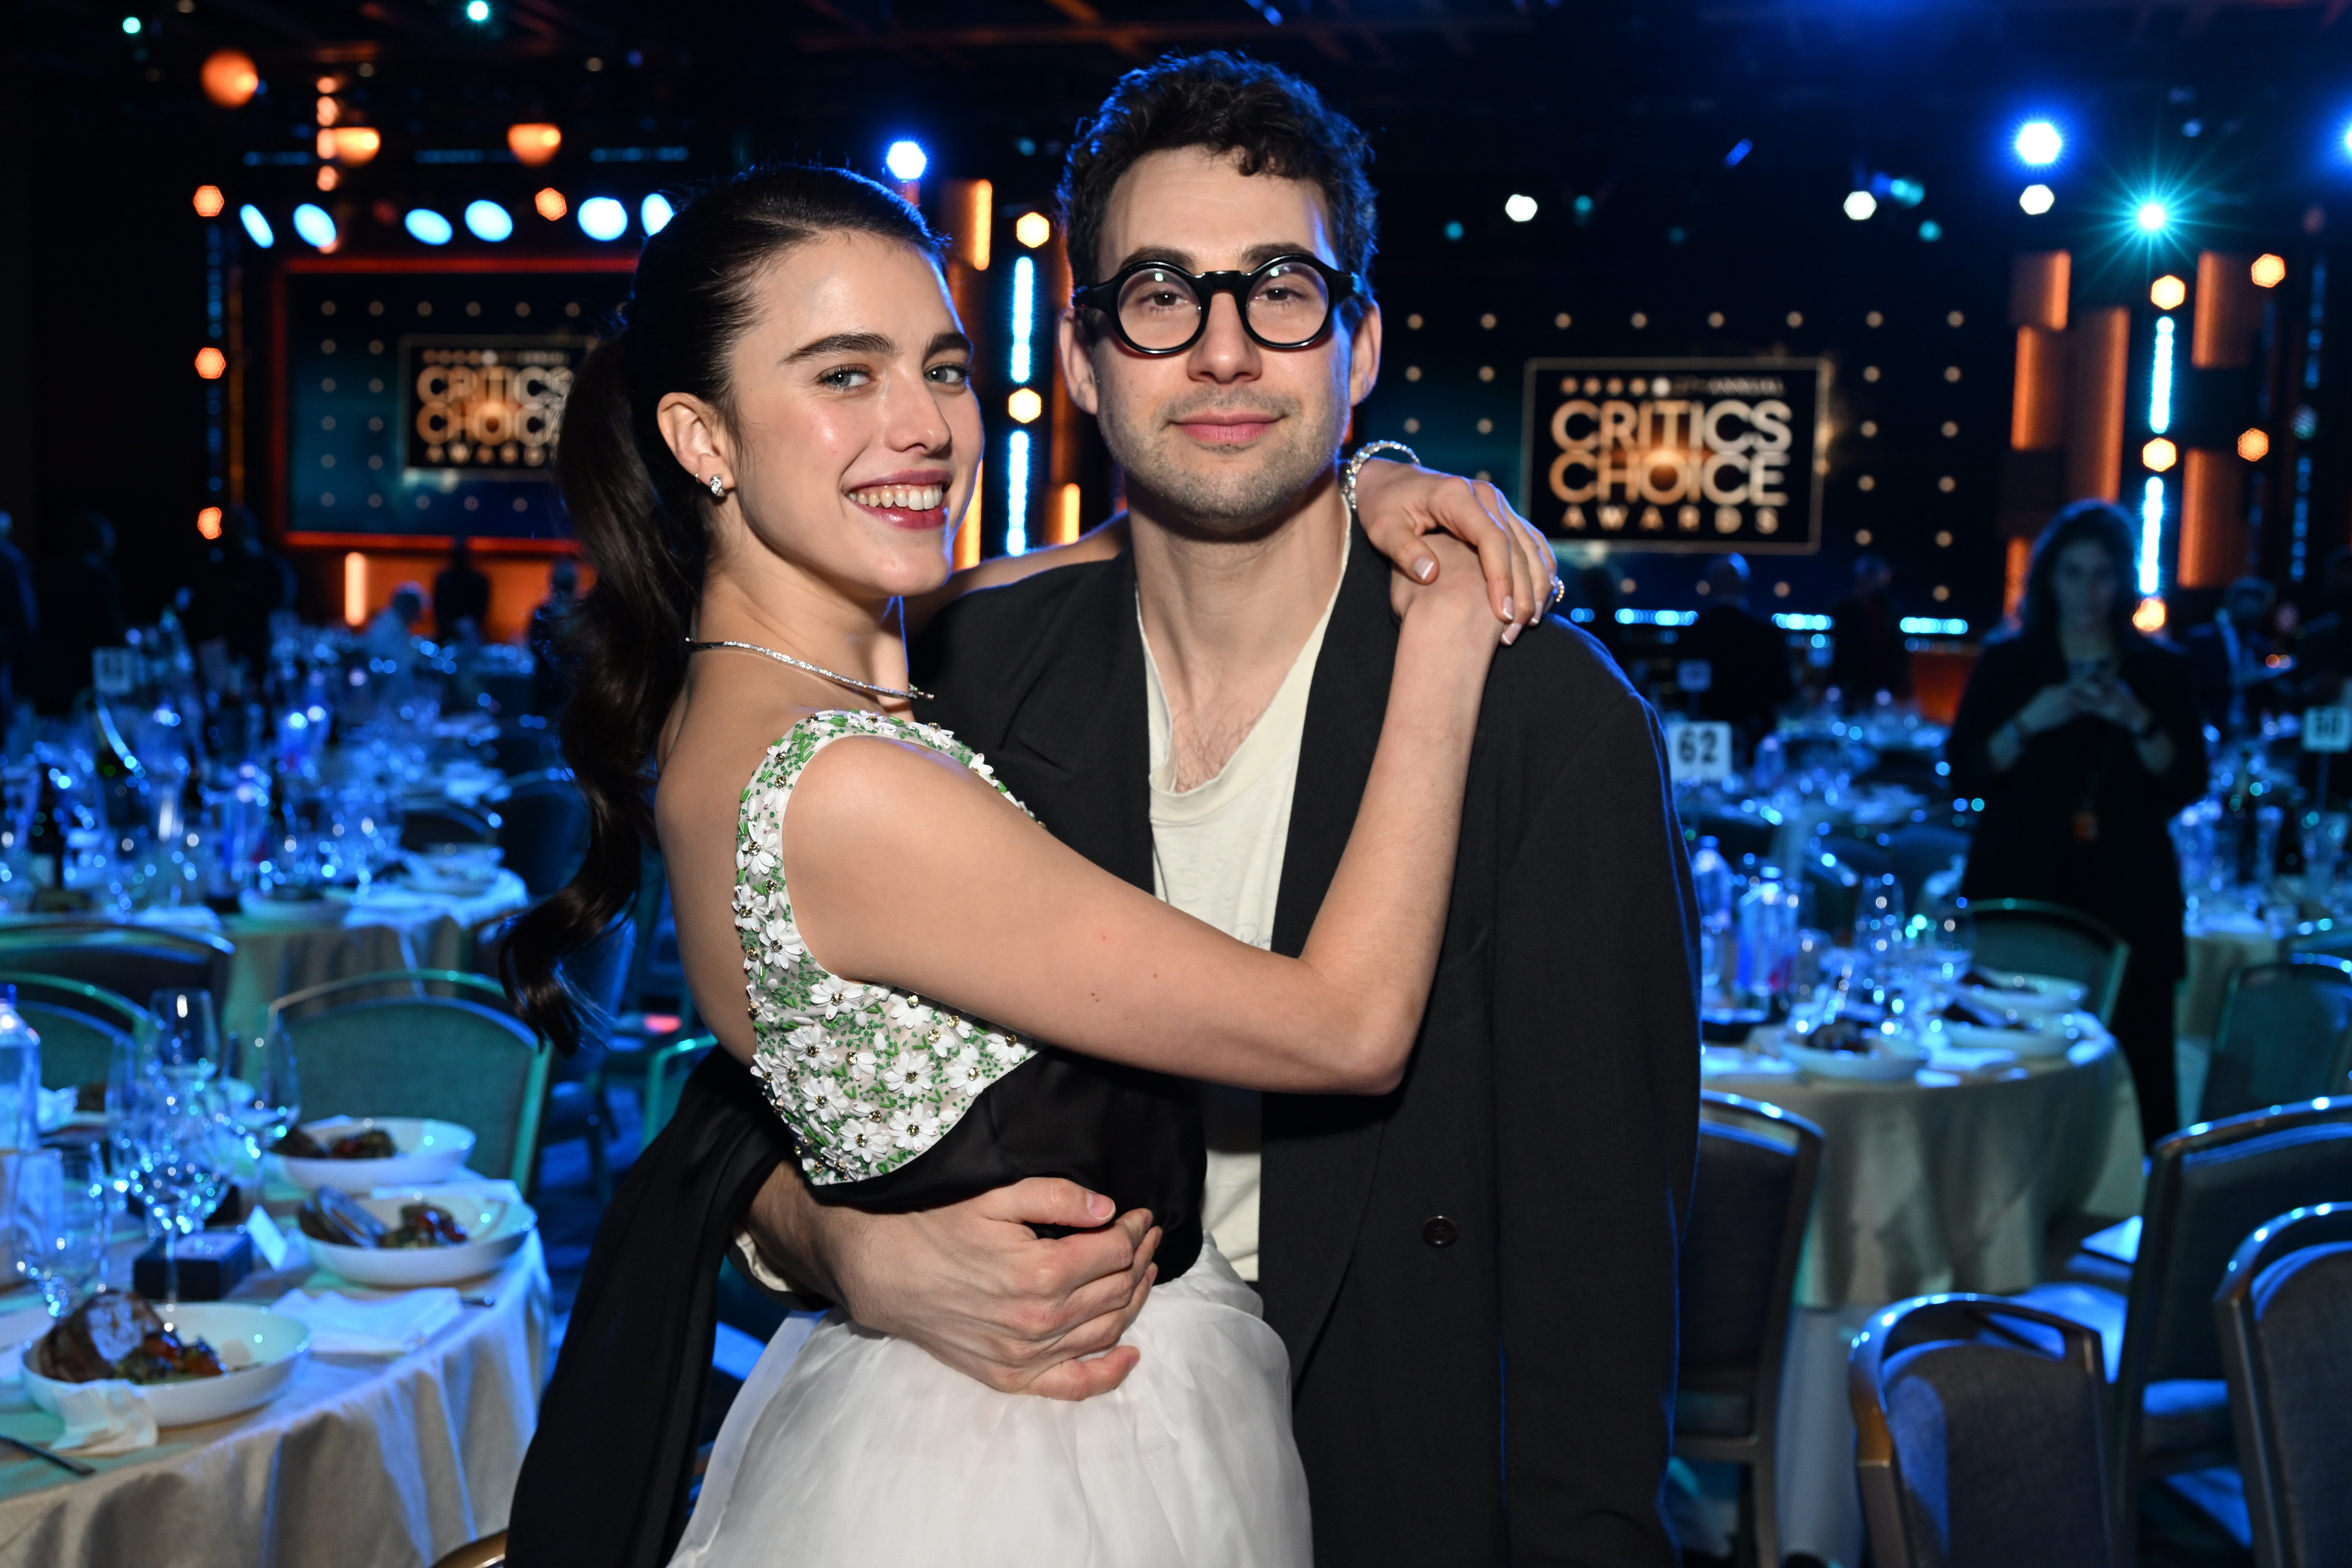 Margaret Qualley and Jack Antonoff celebrate the 27th Annual Critics Choice Awards on March 13, 2022 | Source: Getty Images